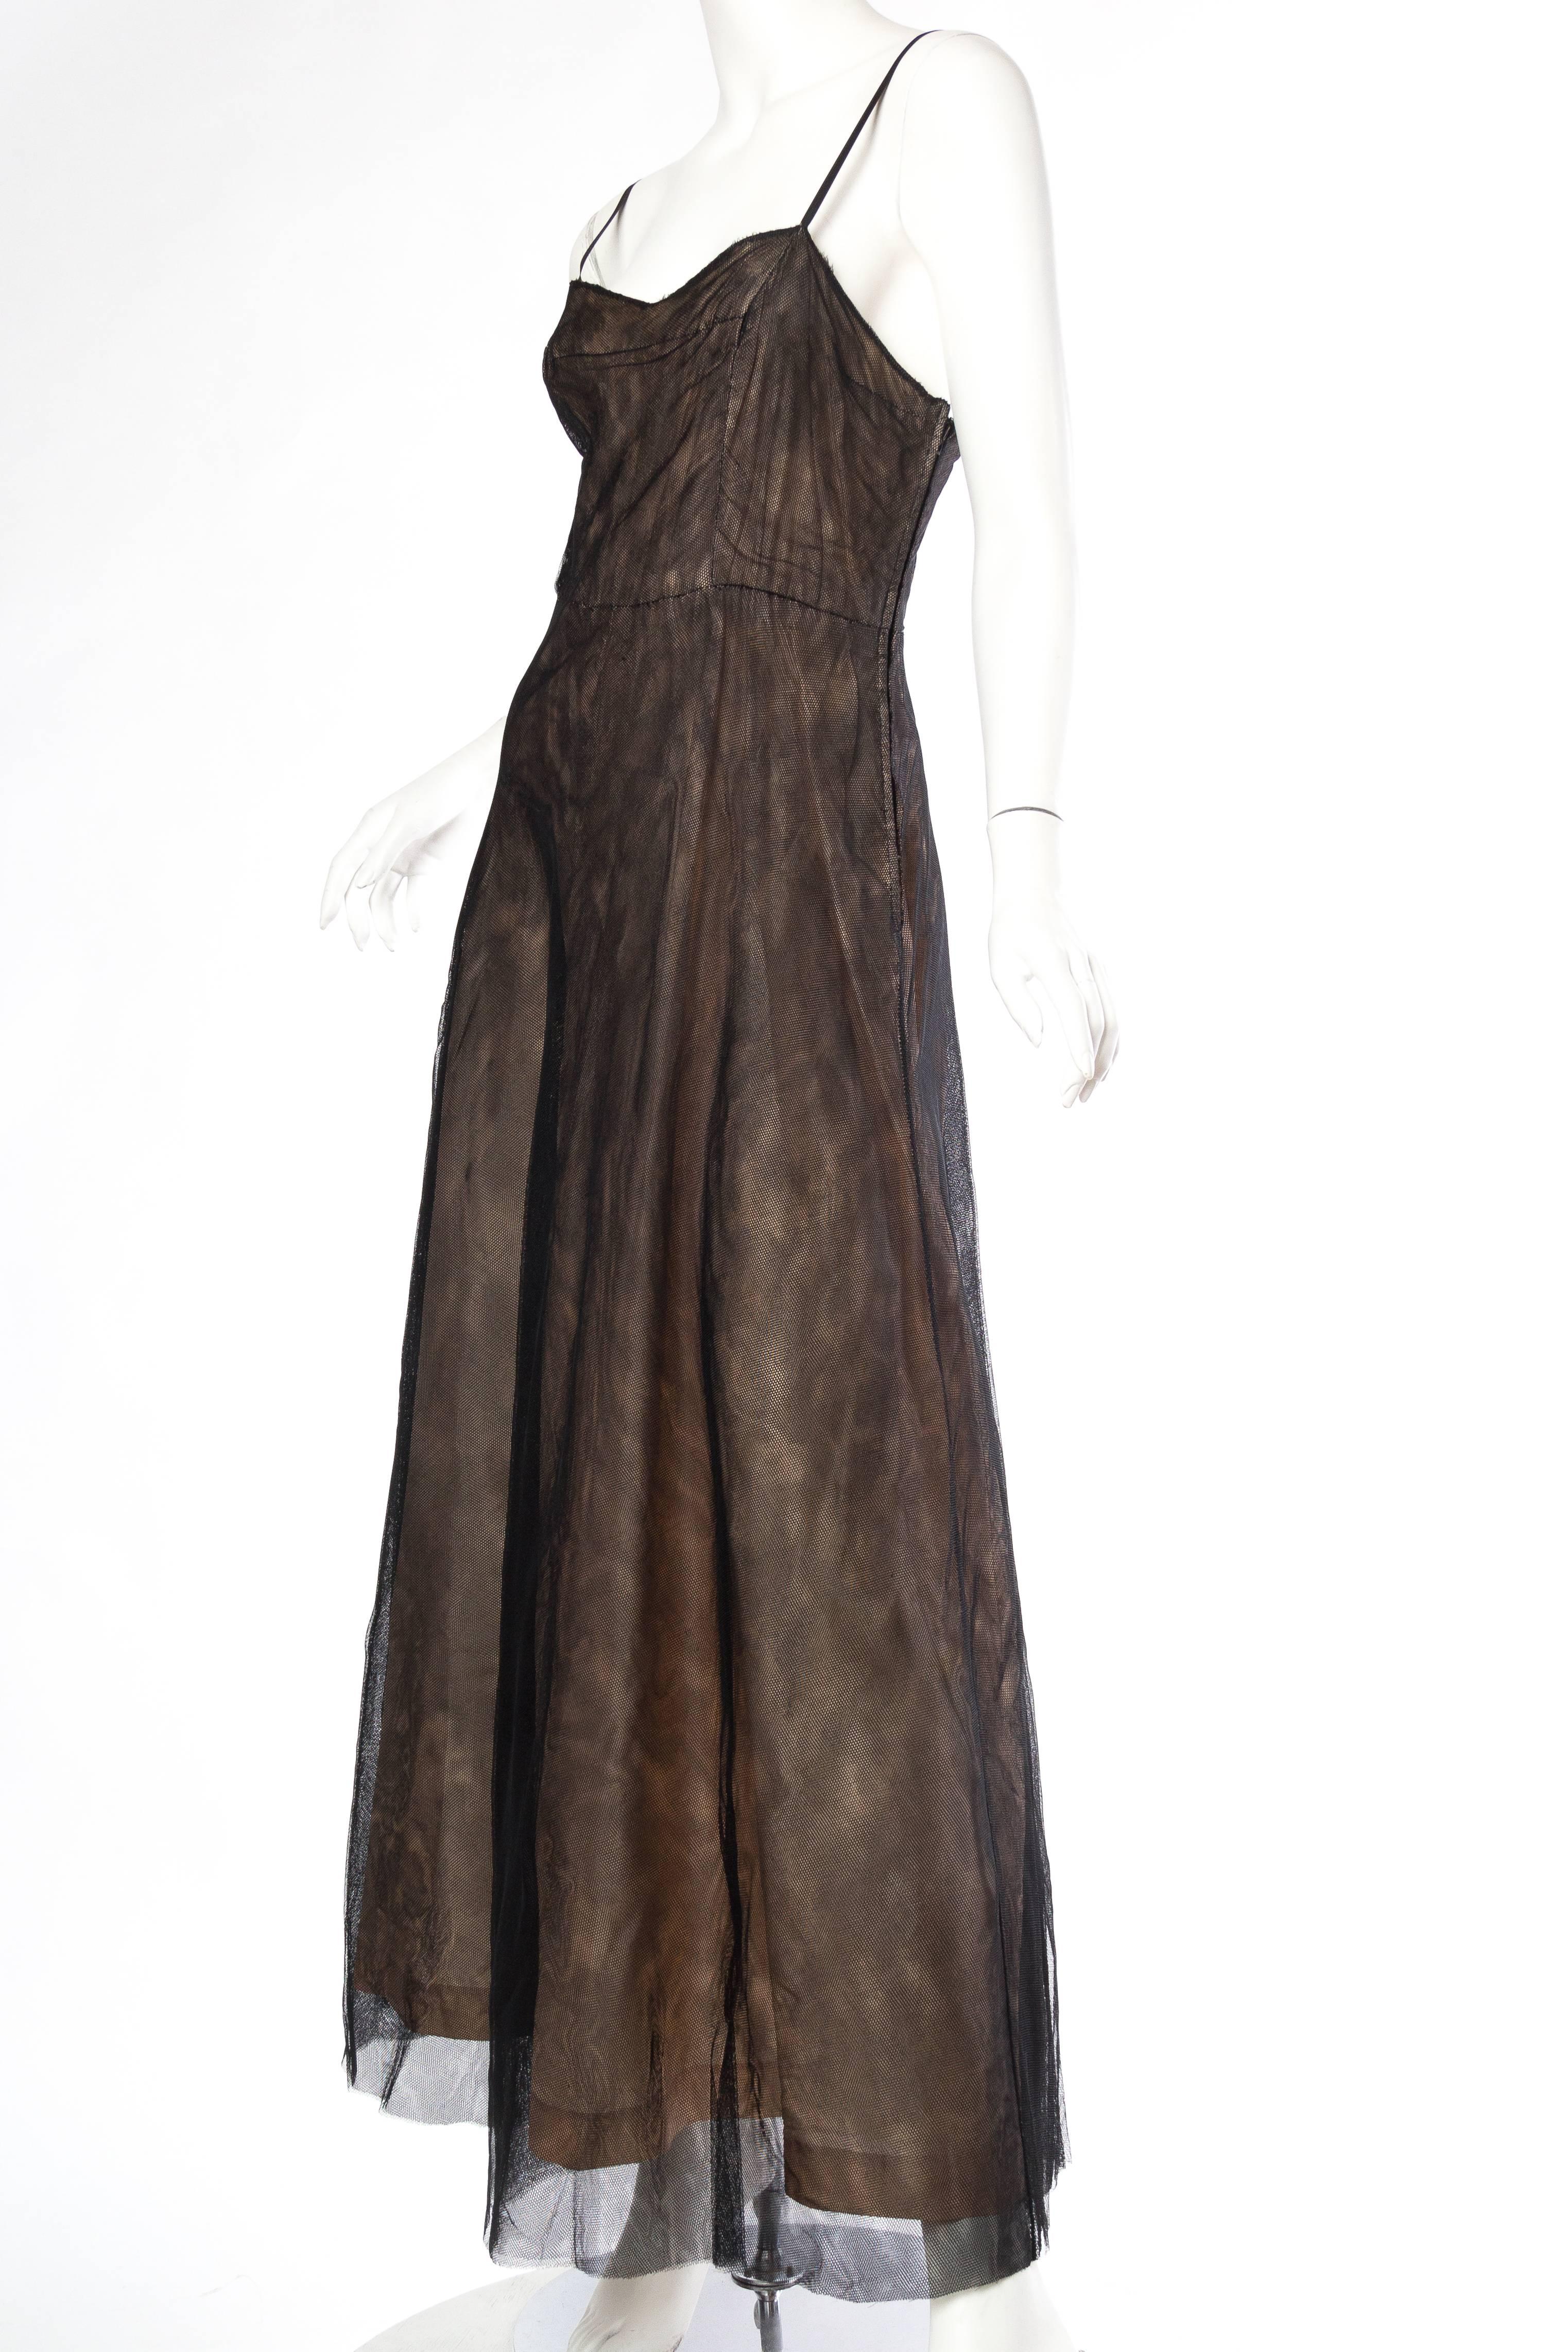 1980 VALENTINO Black Silk Tulle Couture Quality Gown With Lace And Crystal Bodi 1